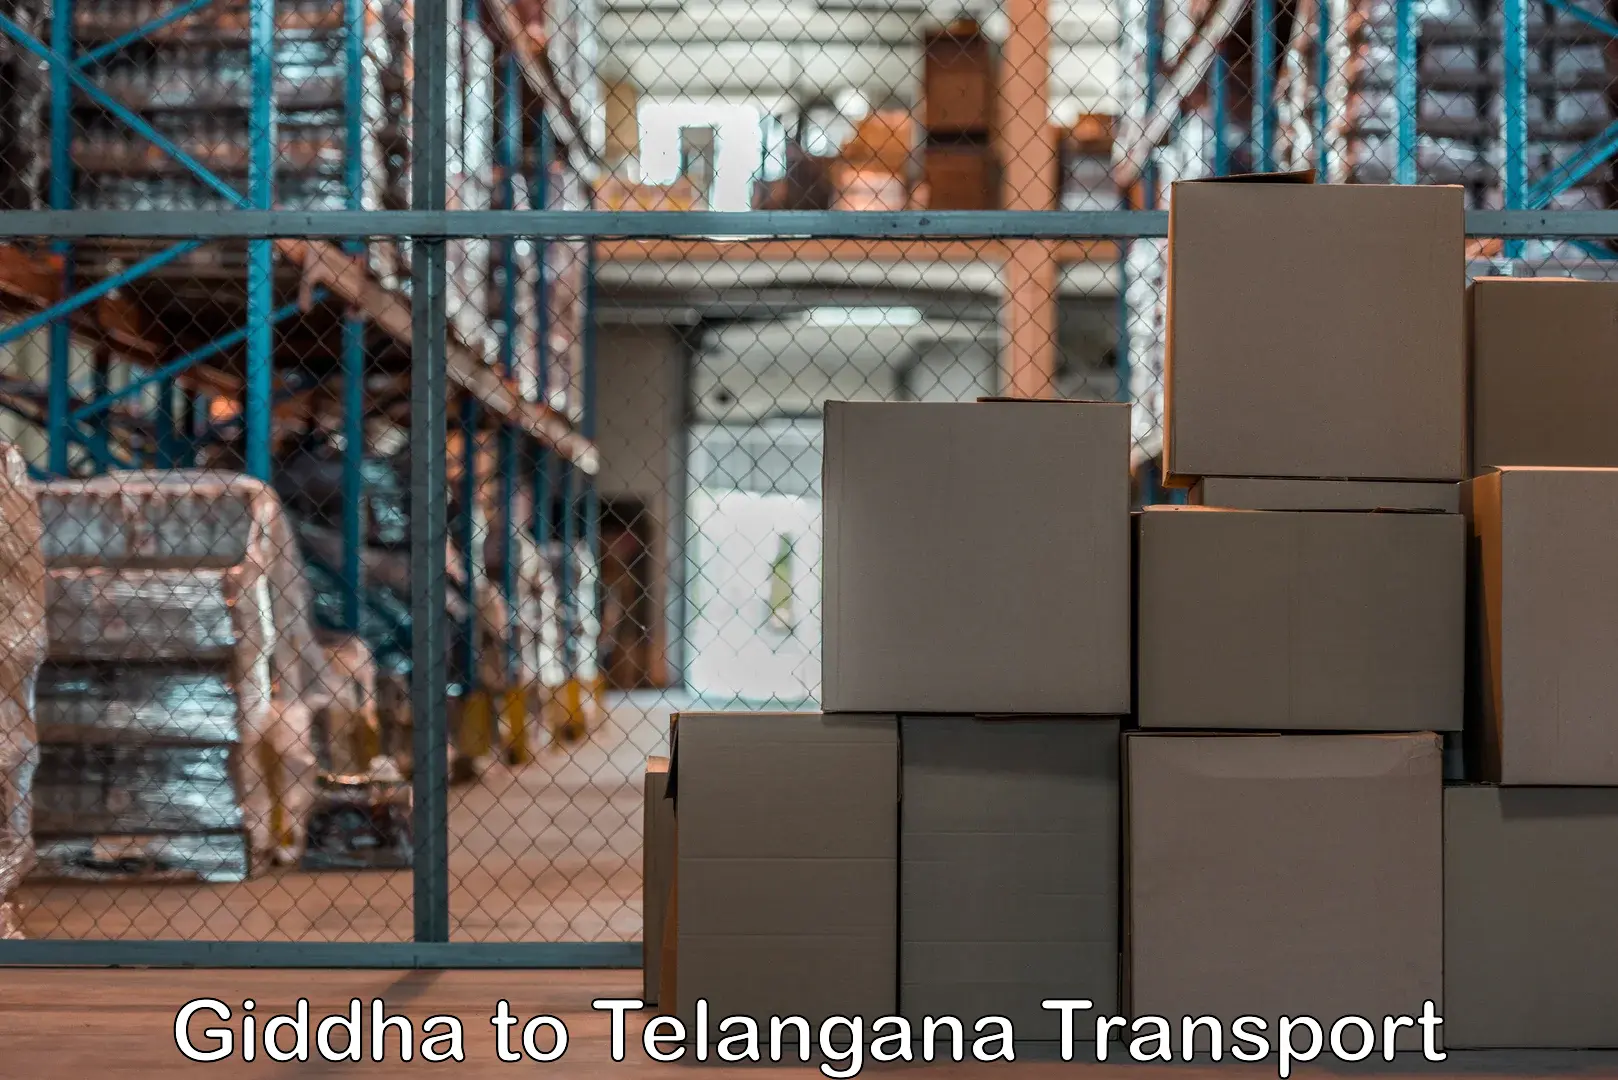 Truck transport companies in India Giddha to Eligedu